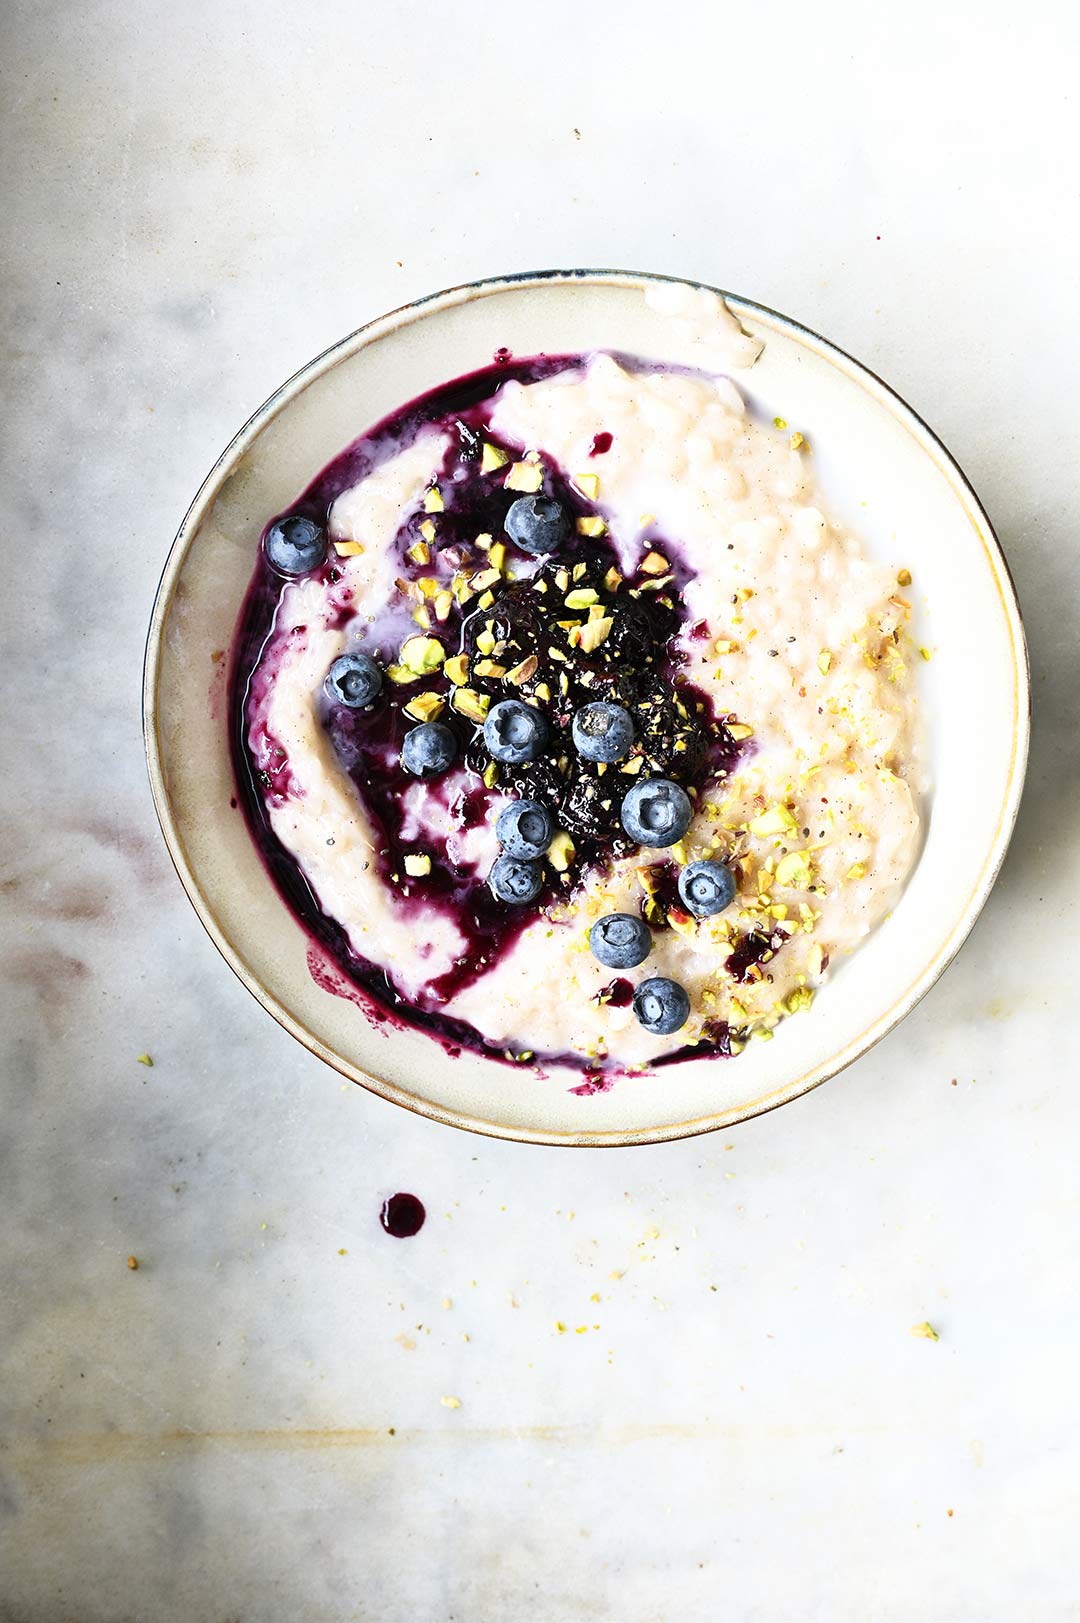 serving dumplings | Spiced coconut rice pudding with ginger blueberries